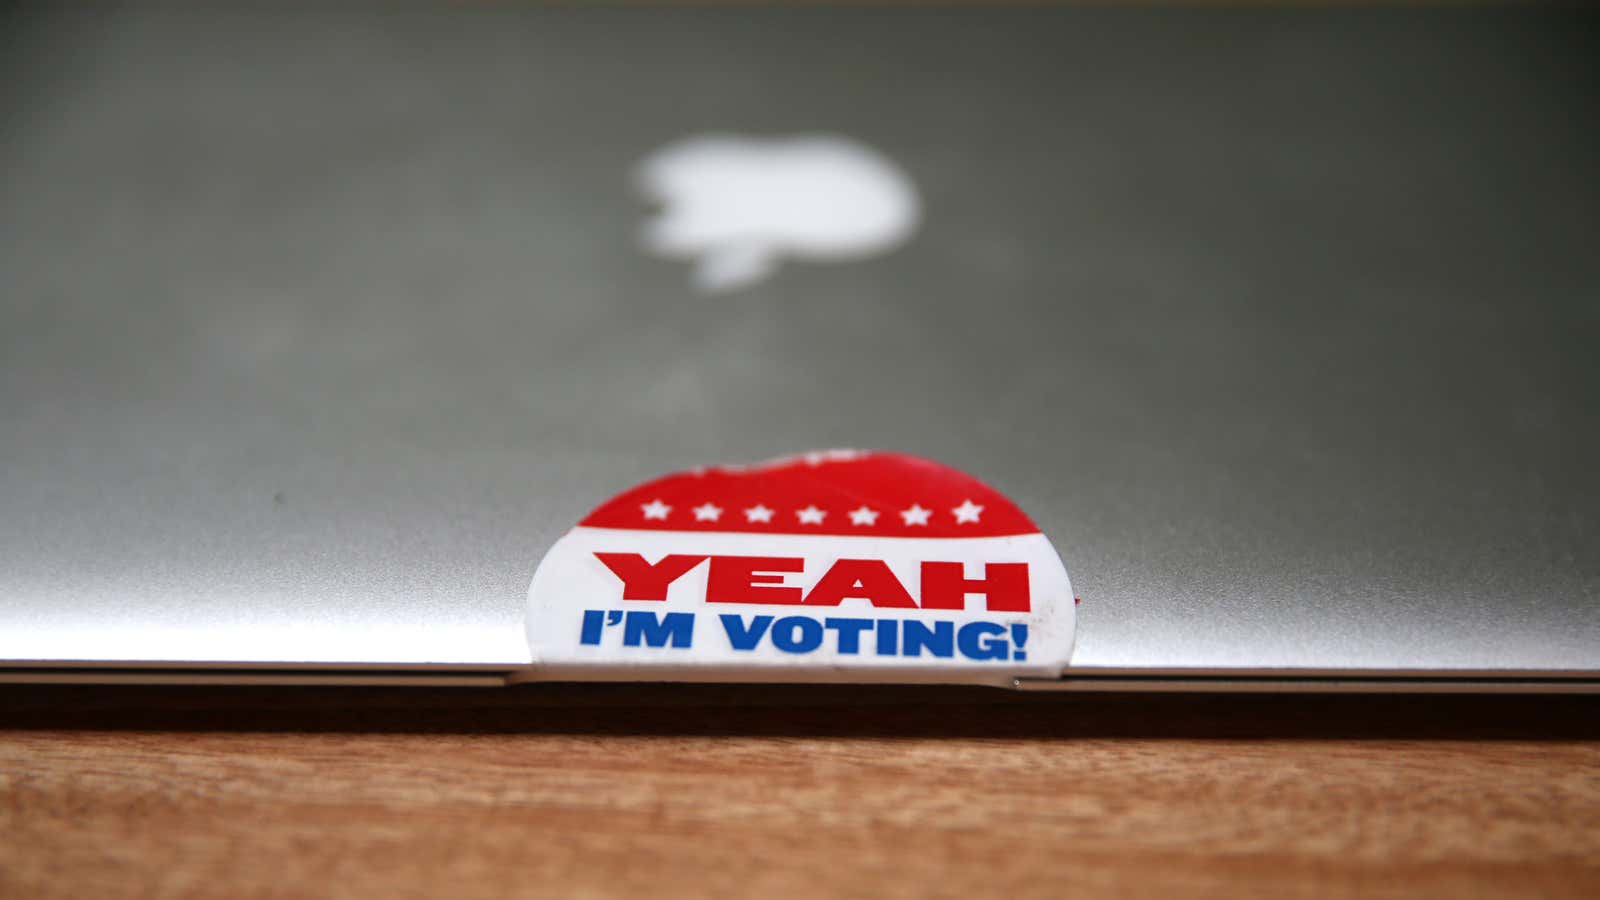 Digital voting hasn’t clicked yet in the US.